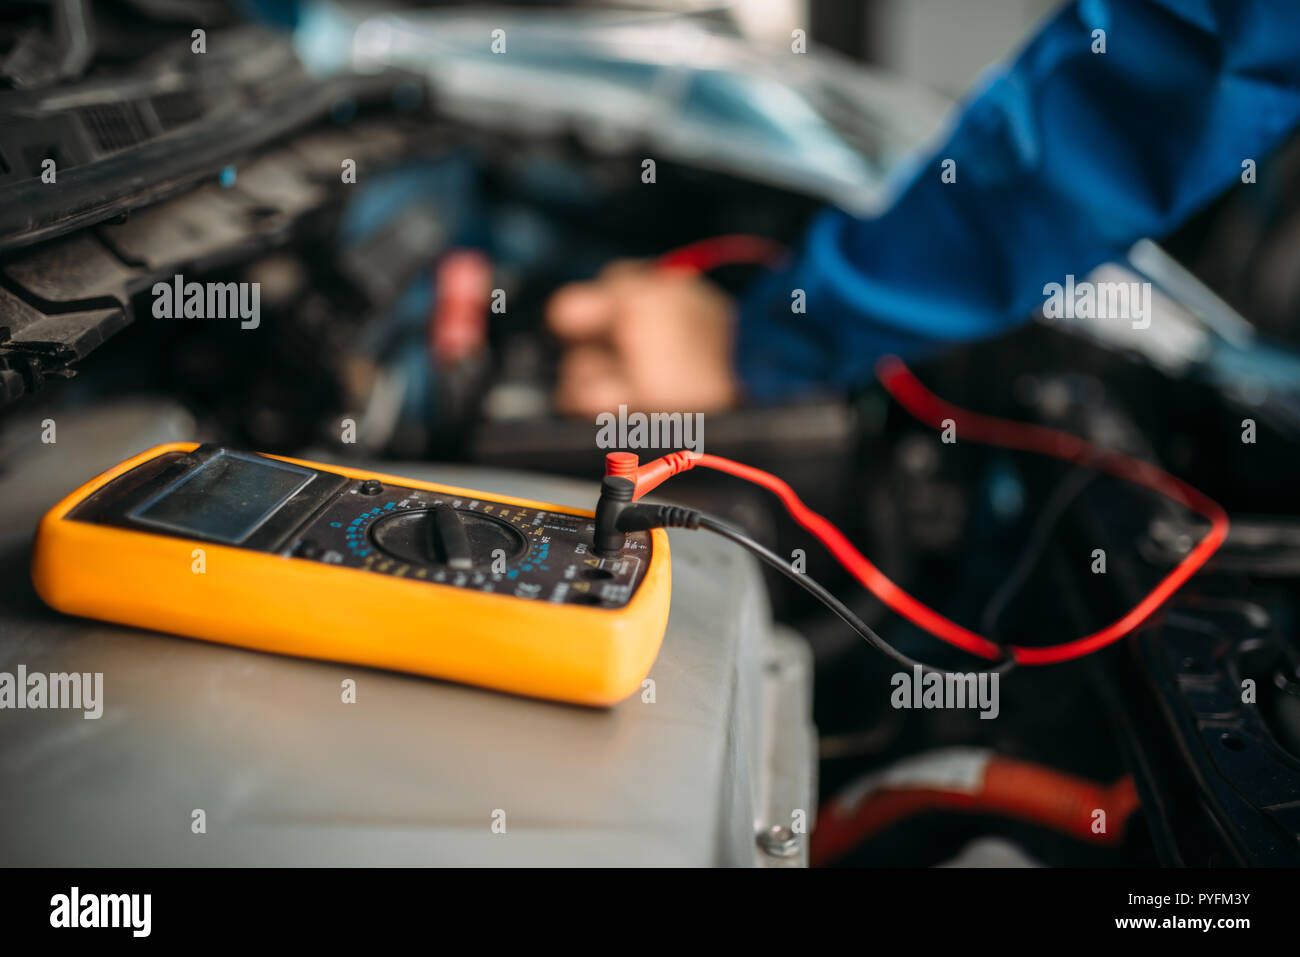 Car repairman with multimeter, battery inspection. Auto-service, vehicle wiring diagnostic, electrician occupation Stock Photo